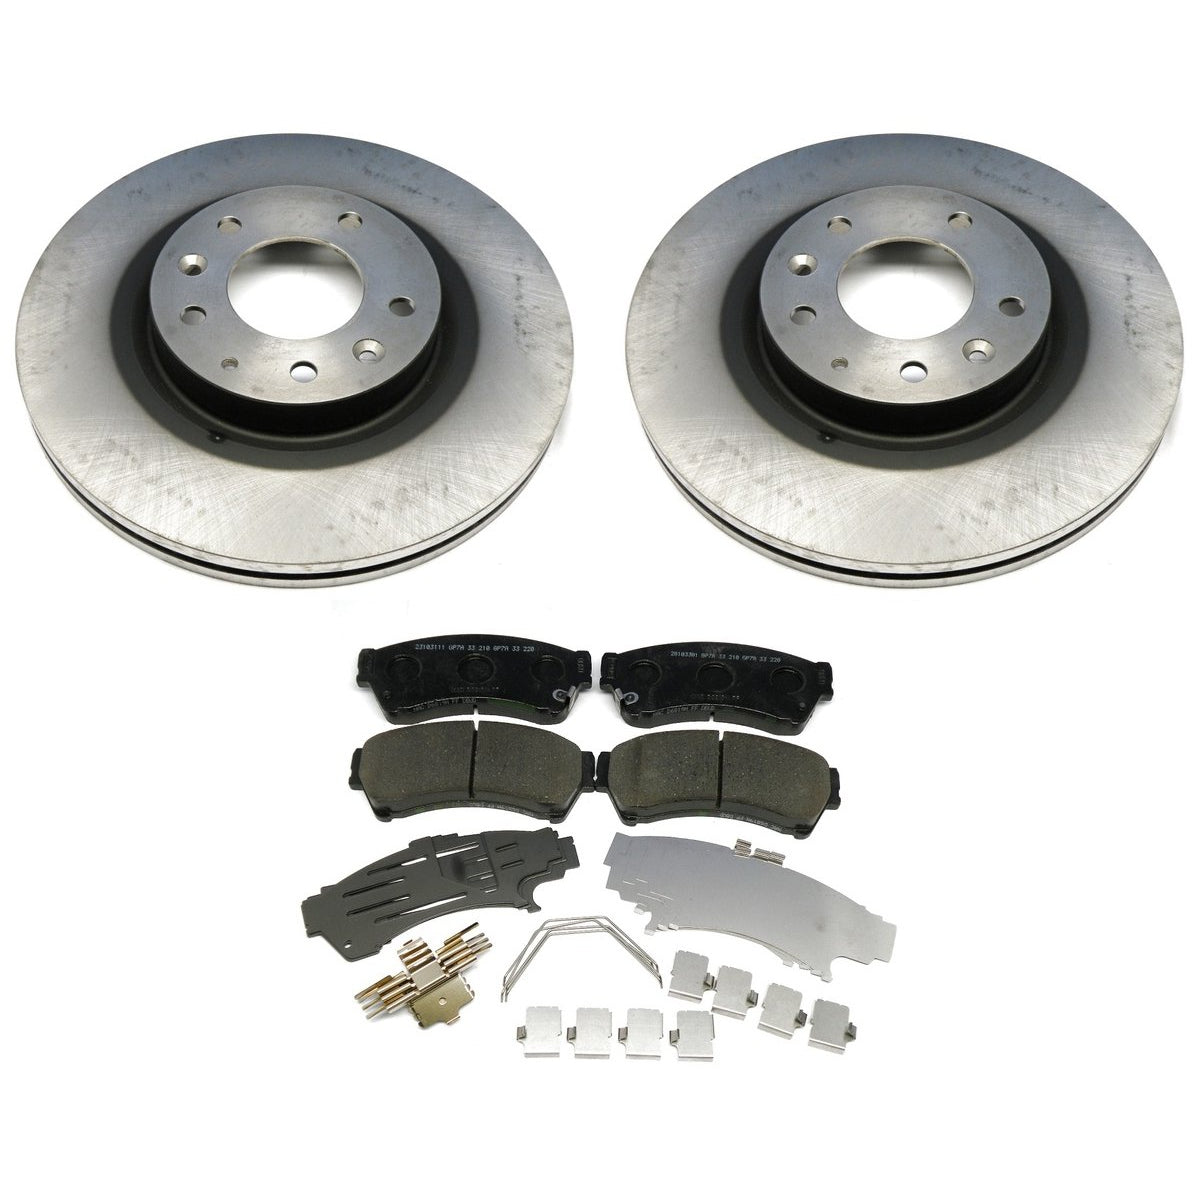 Front Brake Package: Pads, Rotors &amp; Attachment Kit | Mazda6 (2009-2013)